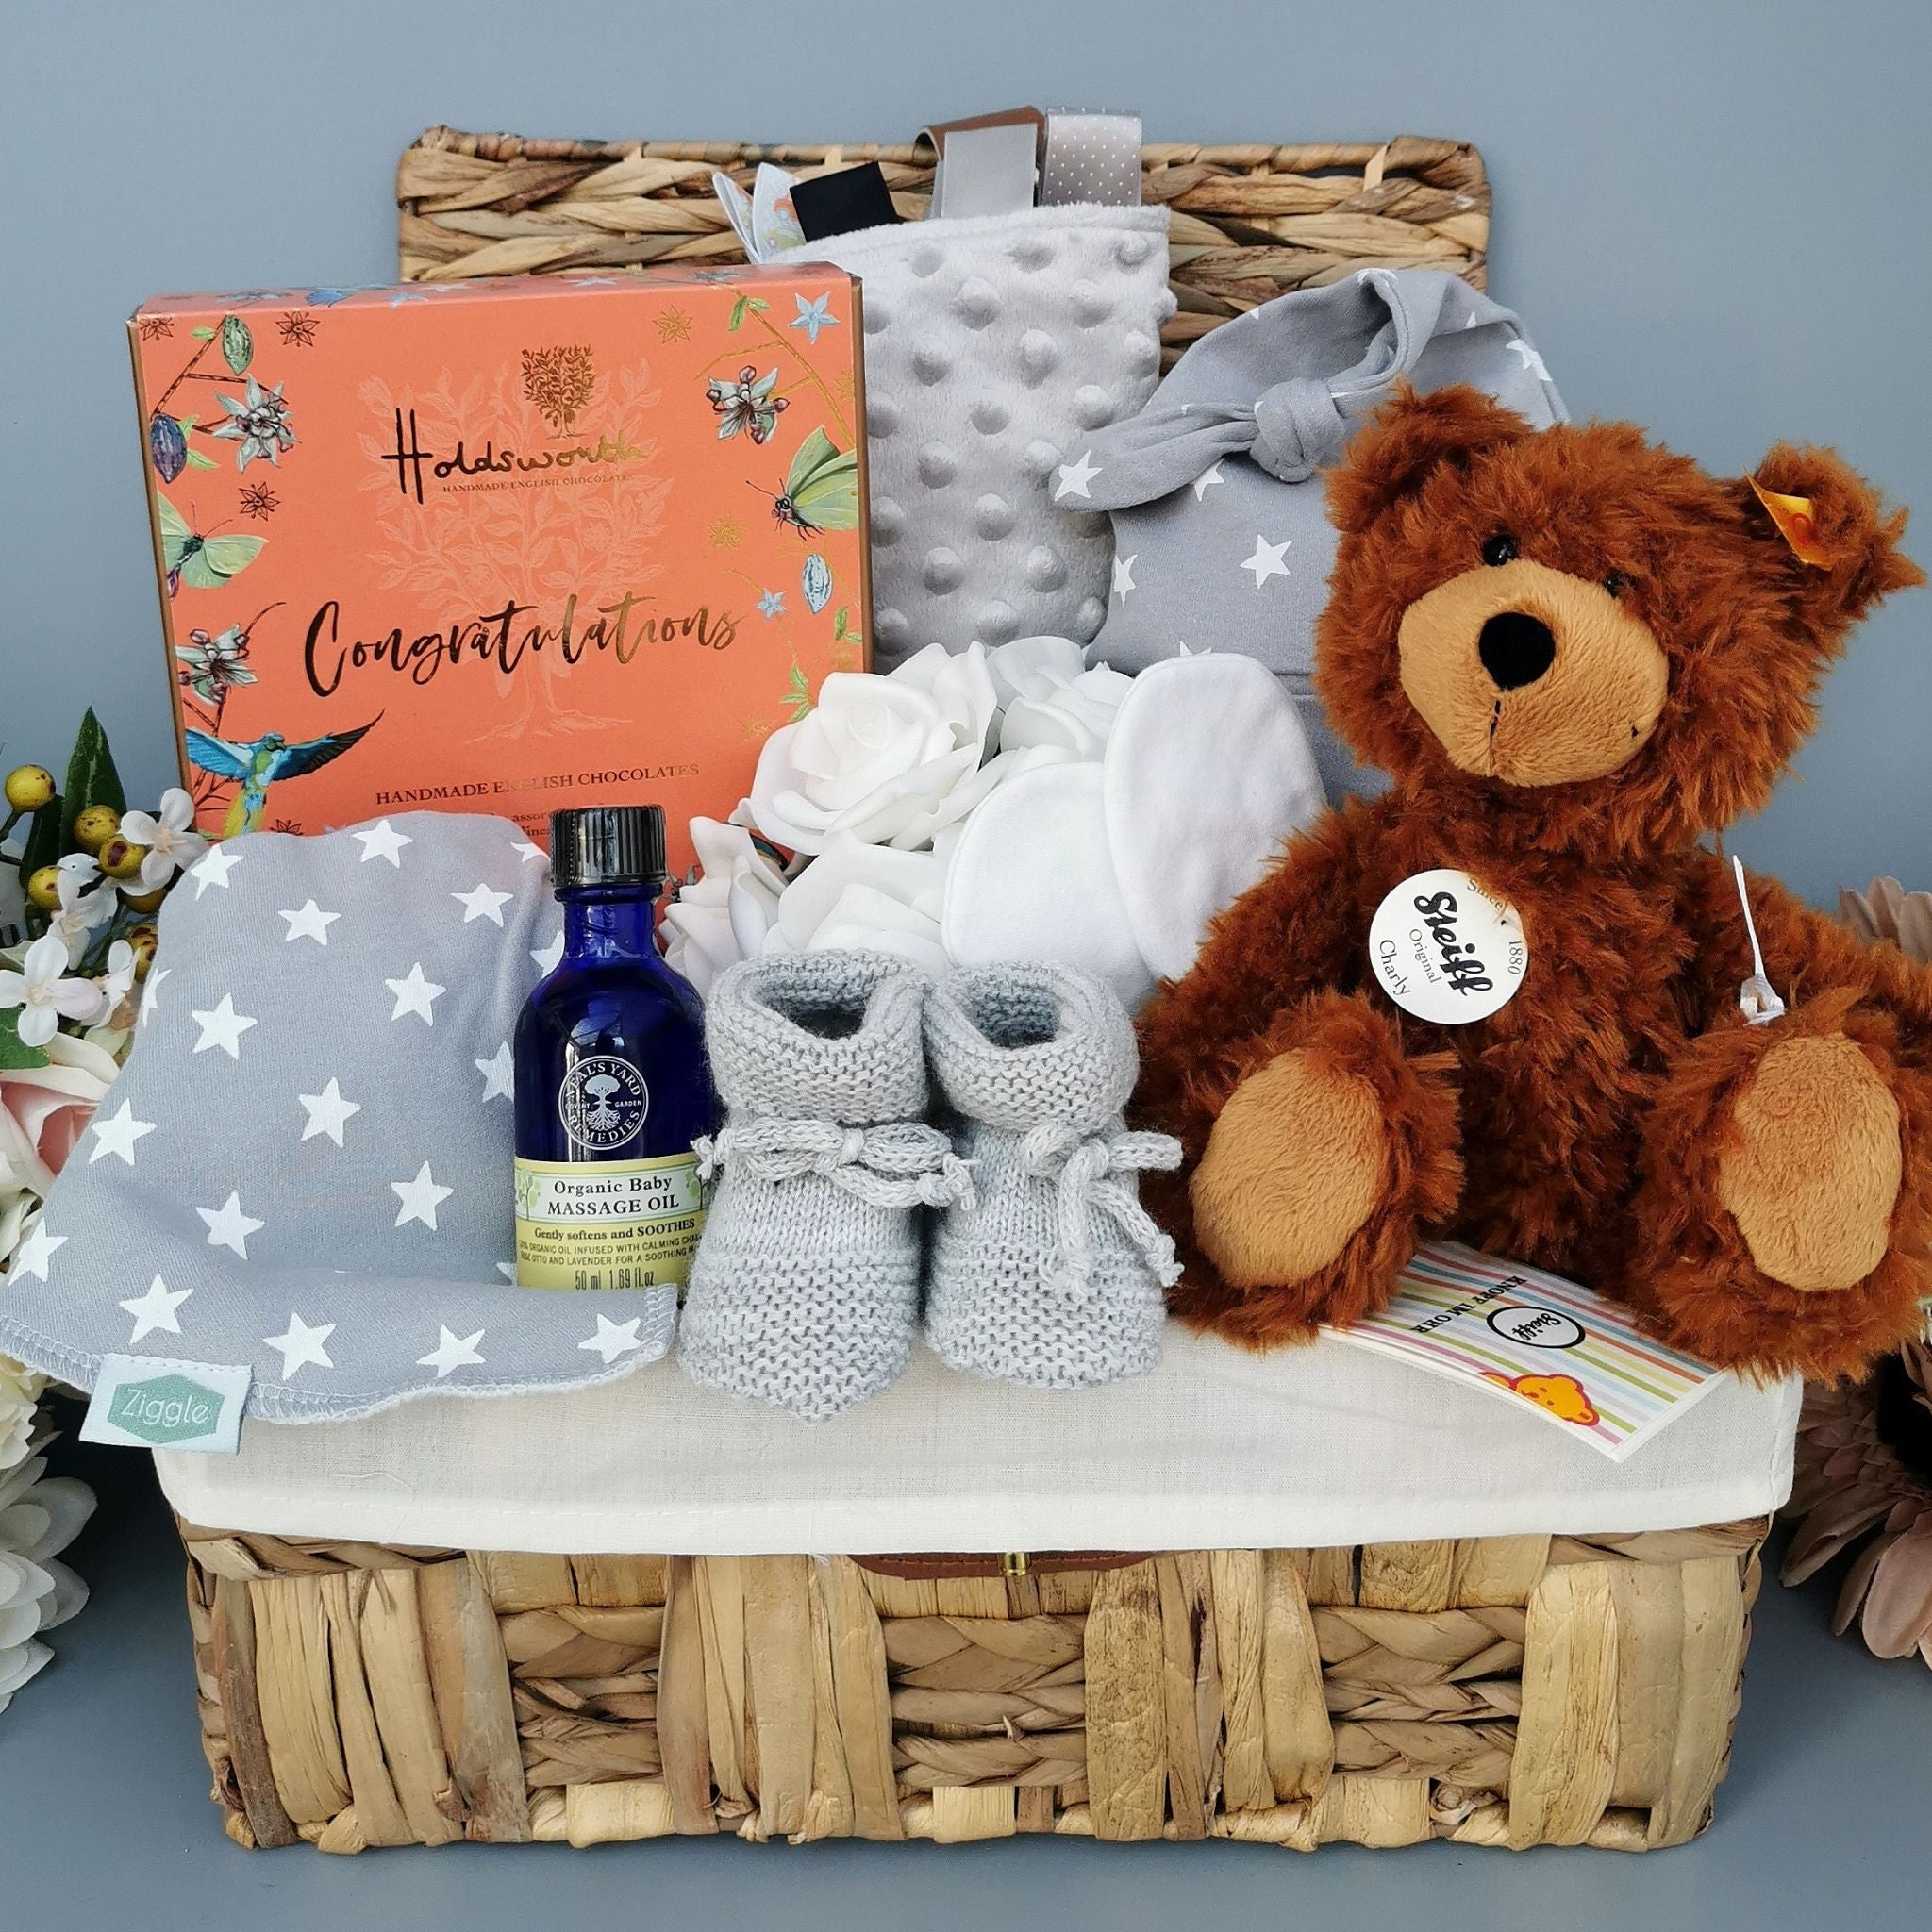 Baby Gift Hamper with Steiff teddy bear and congratulations chocolates